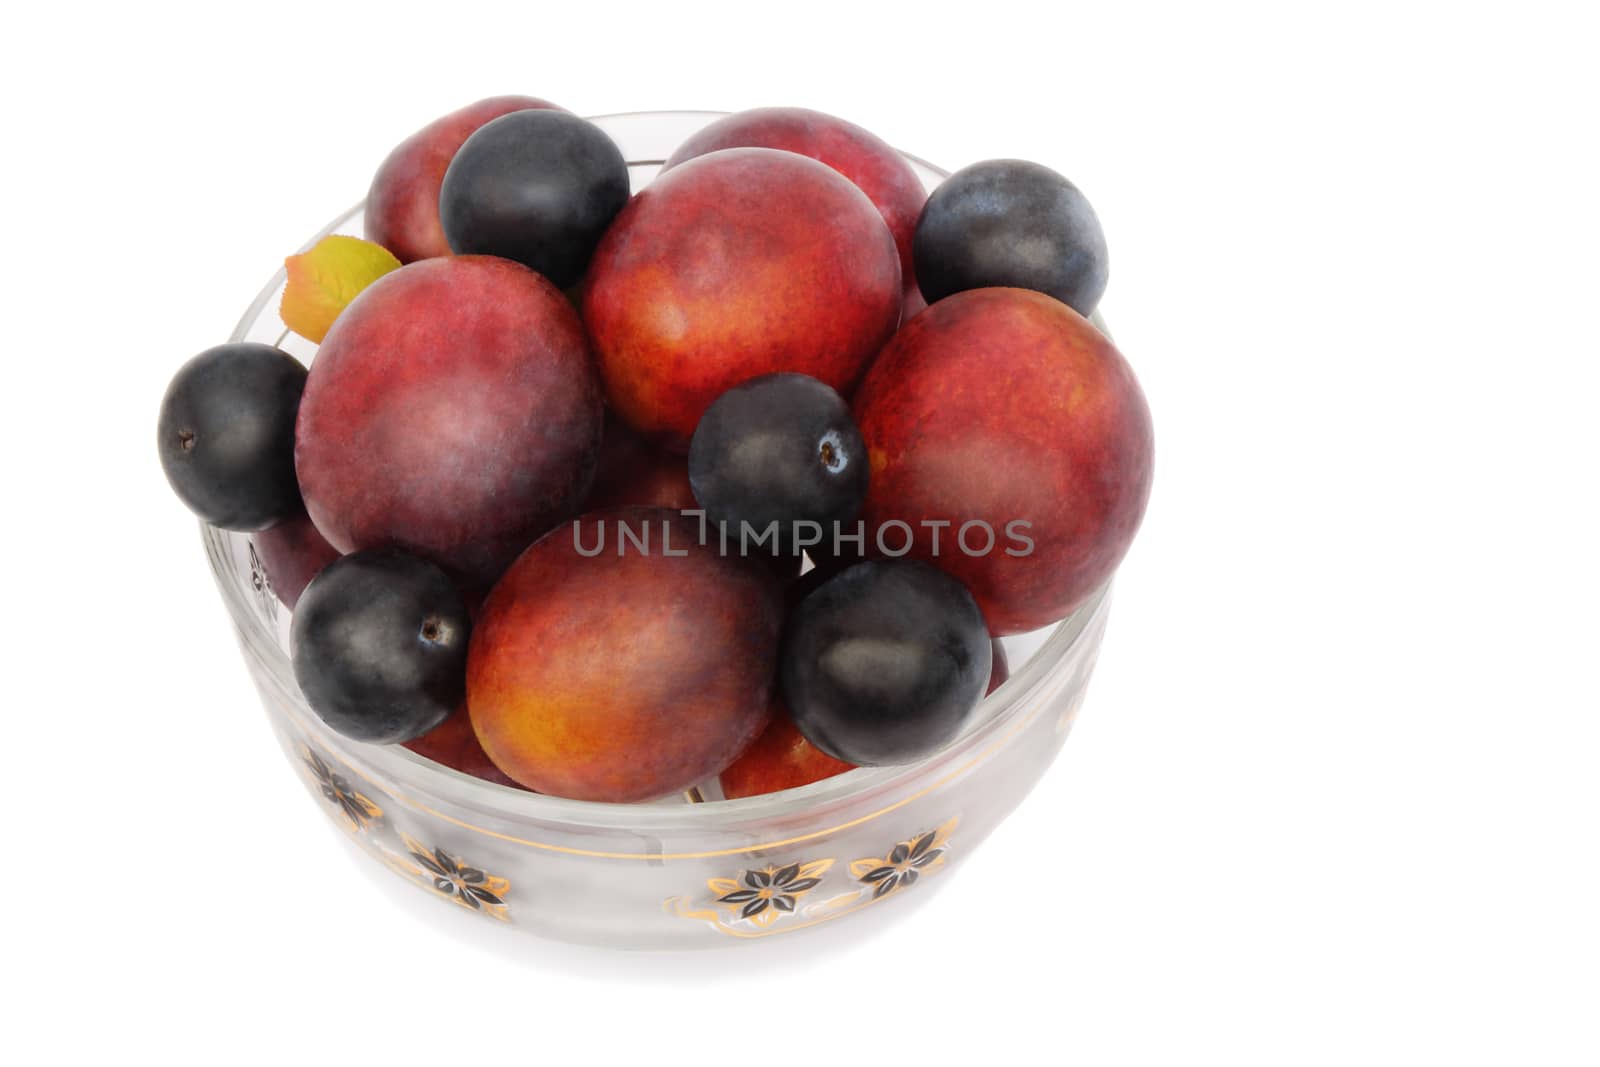 Plums and prunes in a vase for fruit on a white background. by georgina198